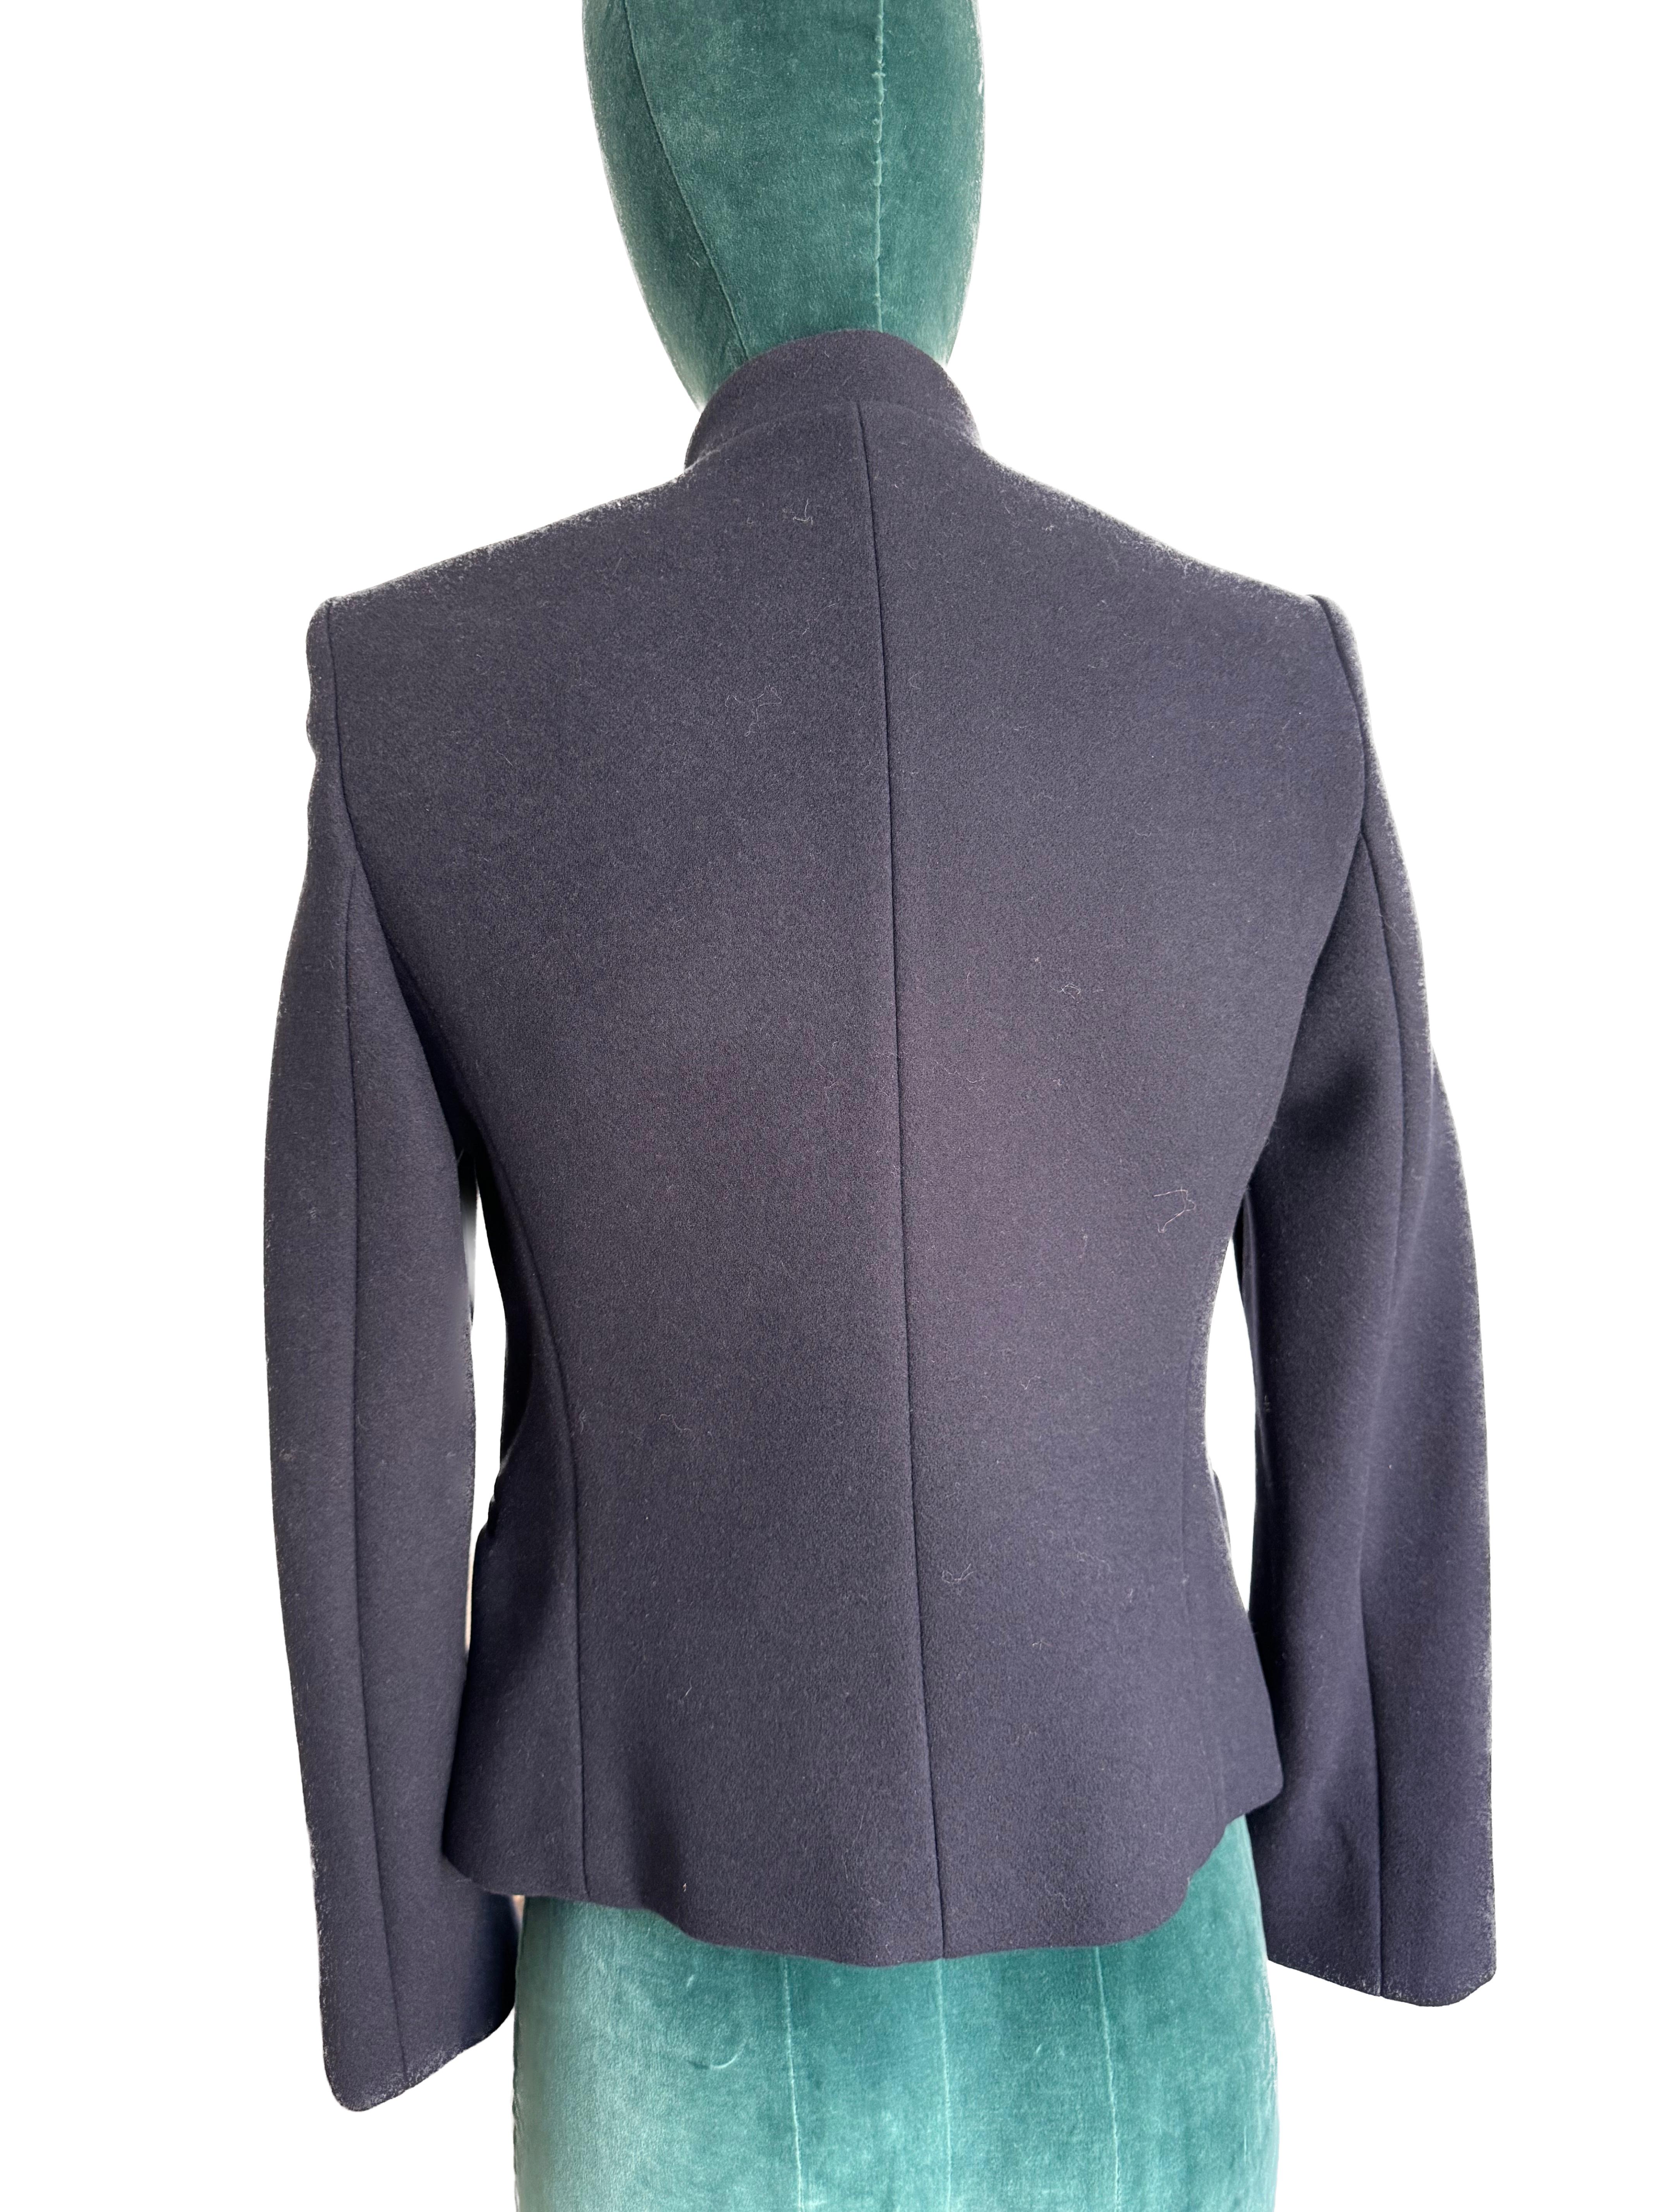 Stella McCartney Blue Wool Jacket with Chain detail  In New Condition For Sale In Toronto, CA